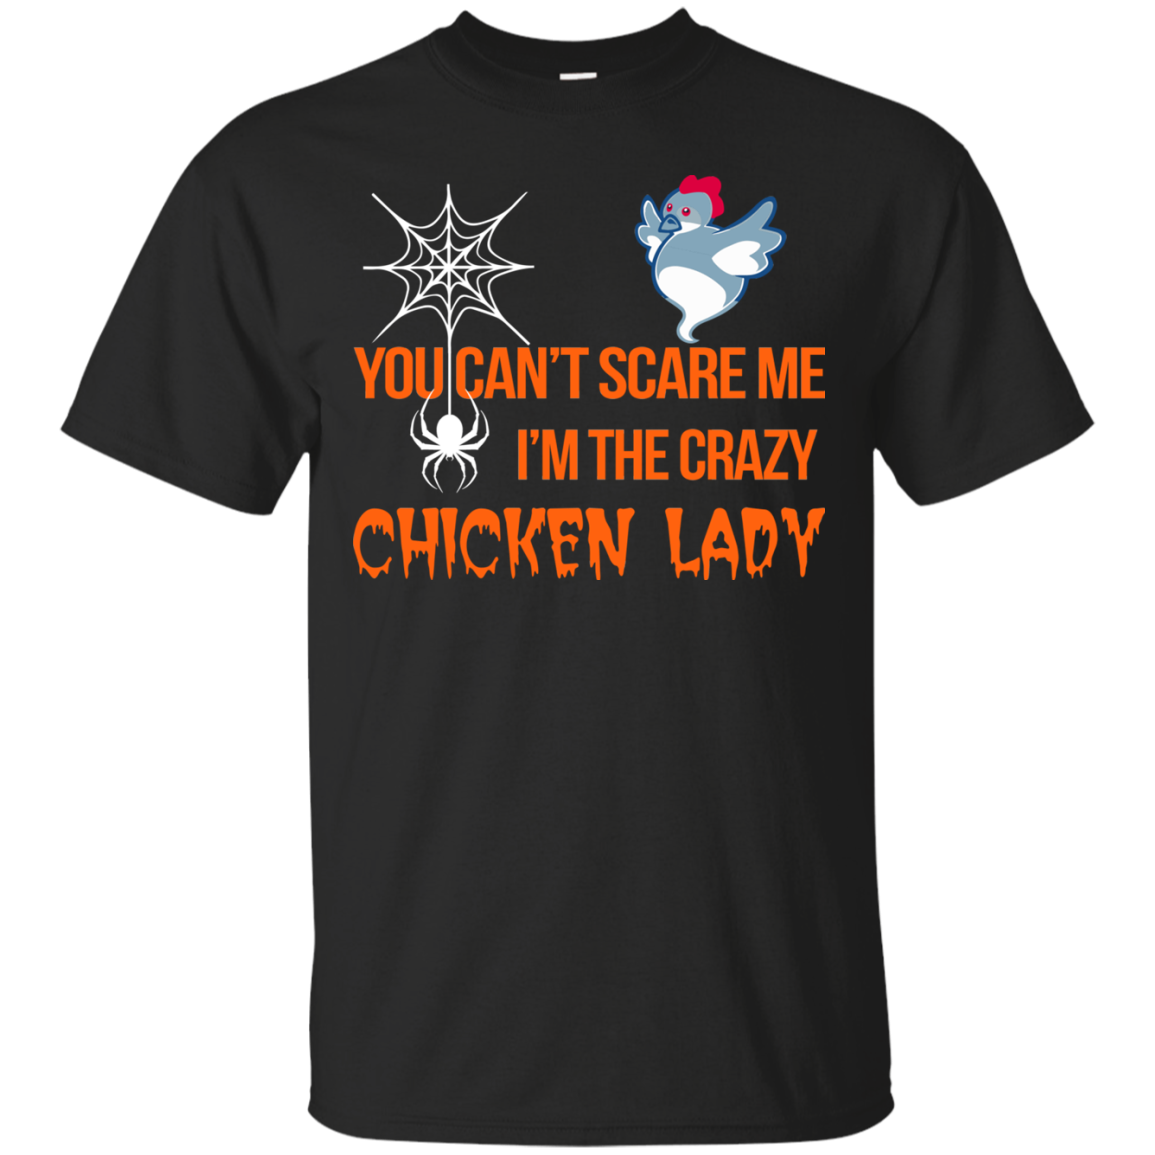 You can't scare me I'm the scary chicken Lady shirt, sweater